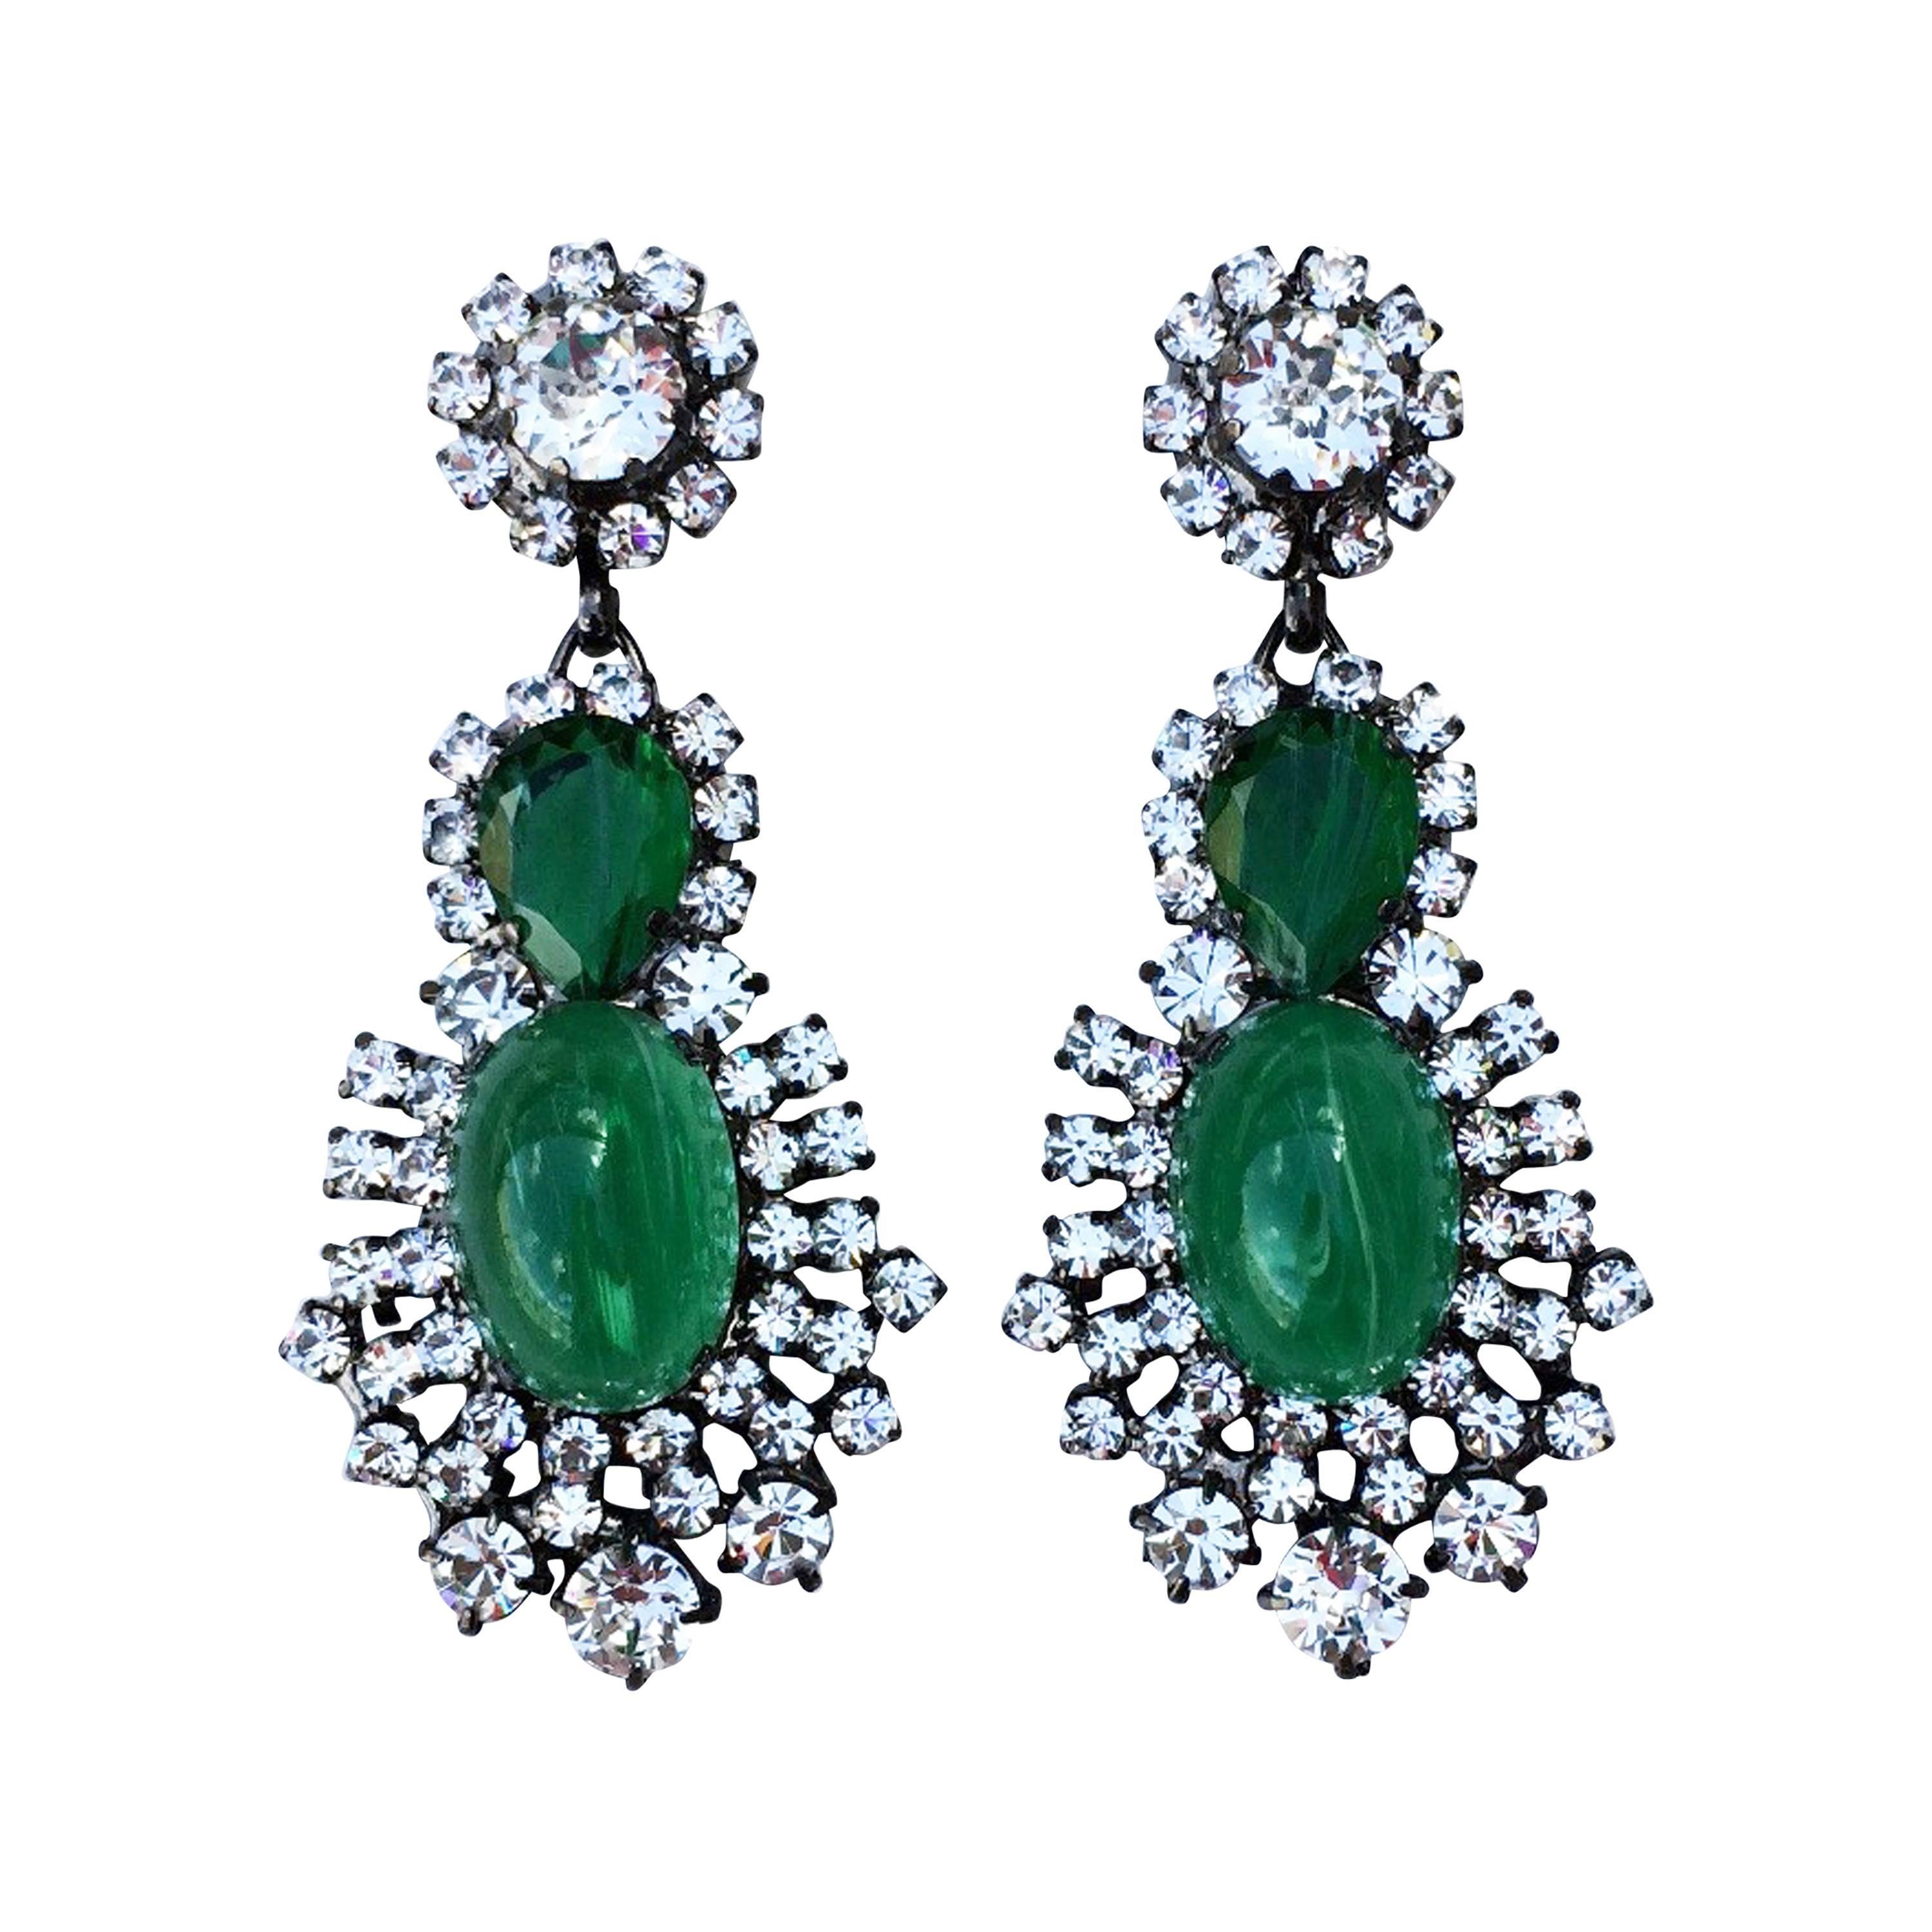 Alan Anderson Couture Crystal Ear Drops